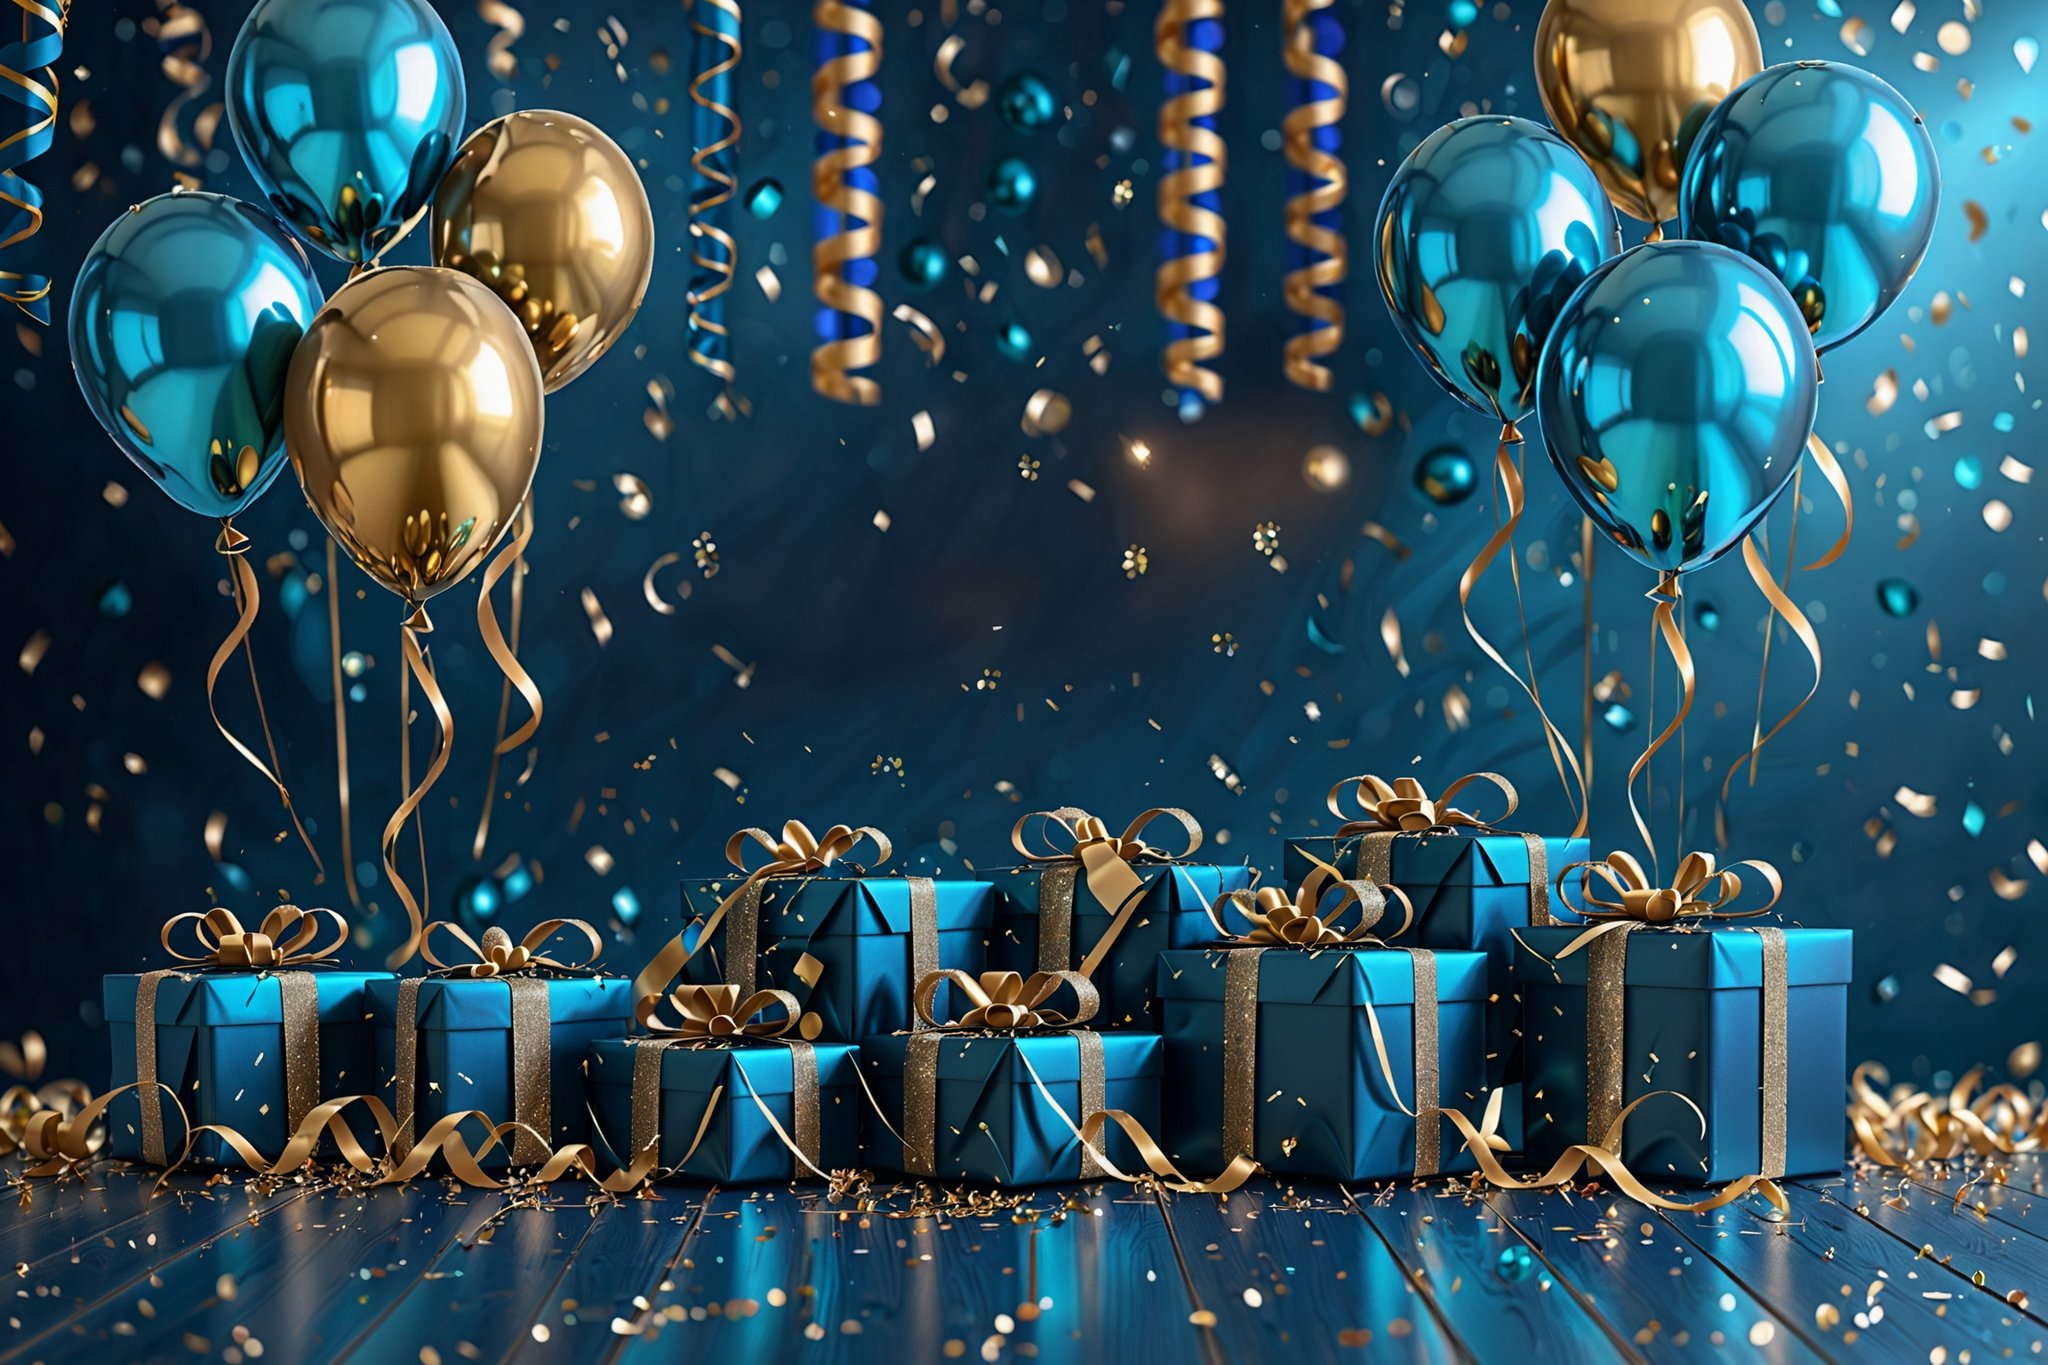 A festive setting with a dark blue background dotted with golden bokeh lights. In the foreground, there are teal-colored balloons, some of which are held aloft by ribbons. Beneath the balloons, there are two teal gift boxes with golden bows. The boxes are placed on a wooden floor, which is scattered with golden confetti, ribbons, and spheres. The entire scene exudes a celebratory and elegant ambiance.